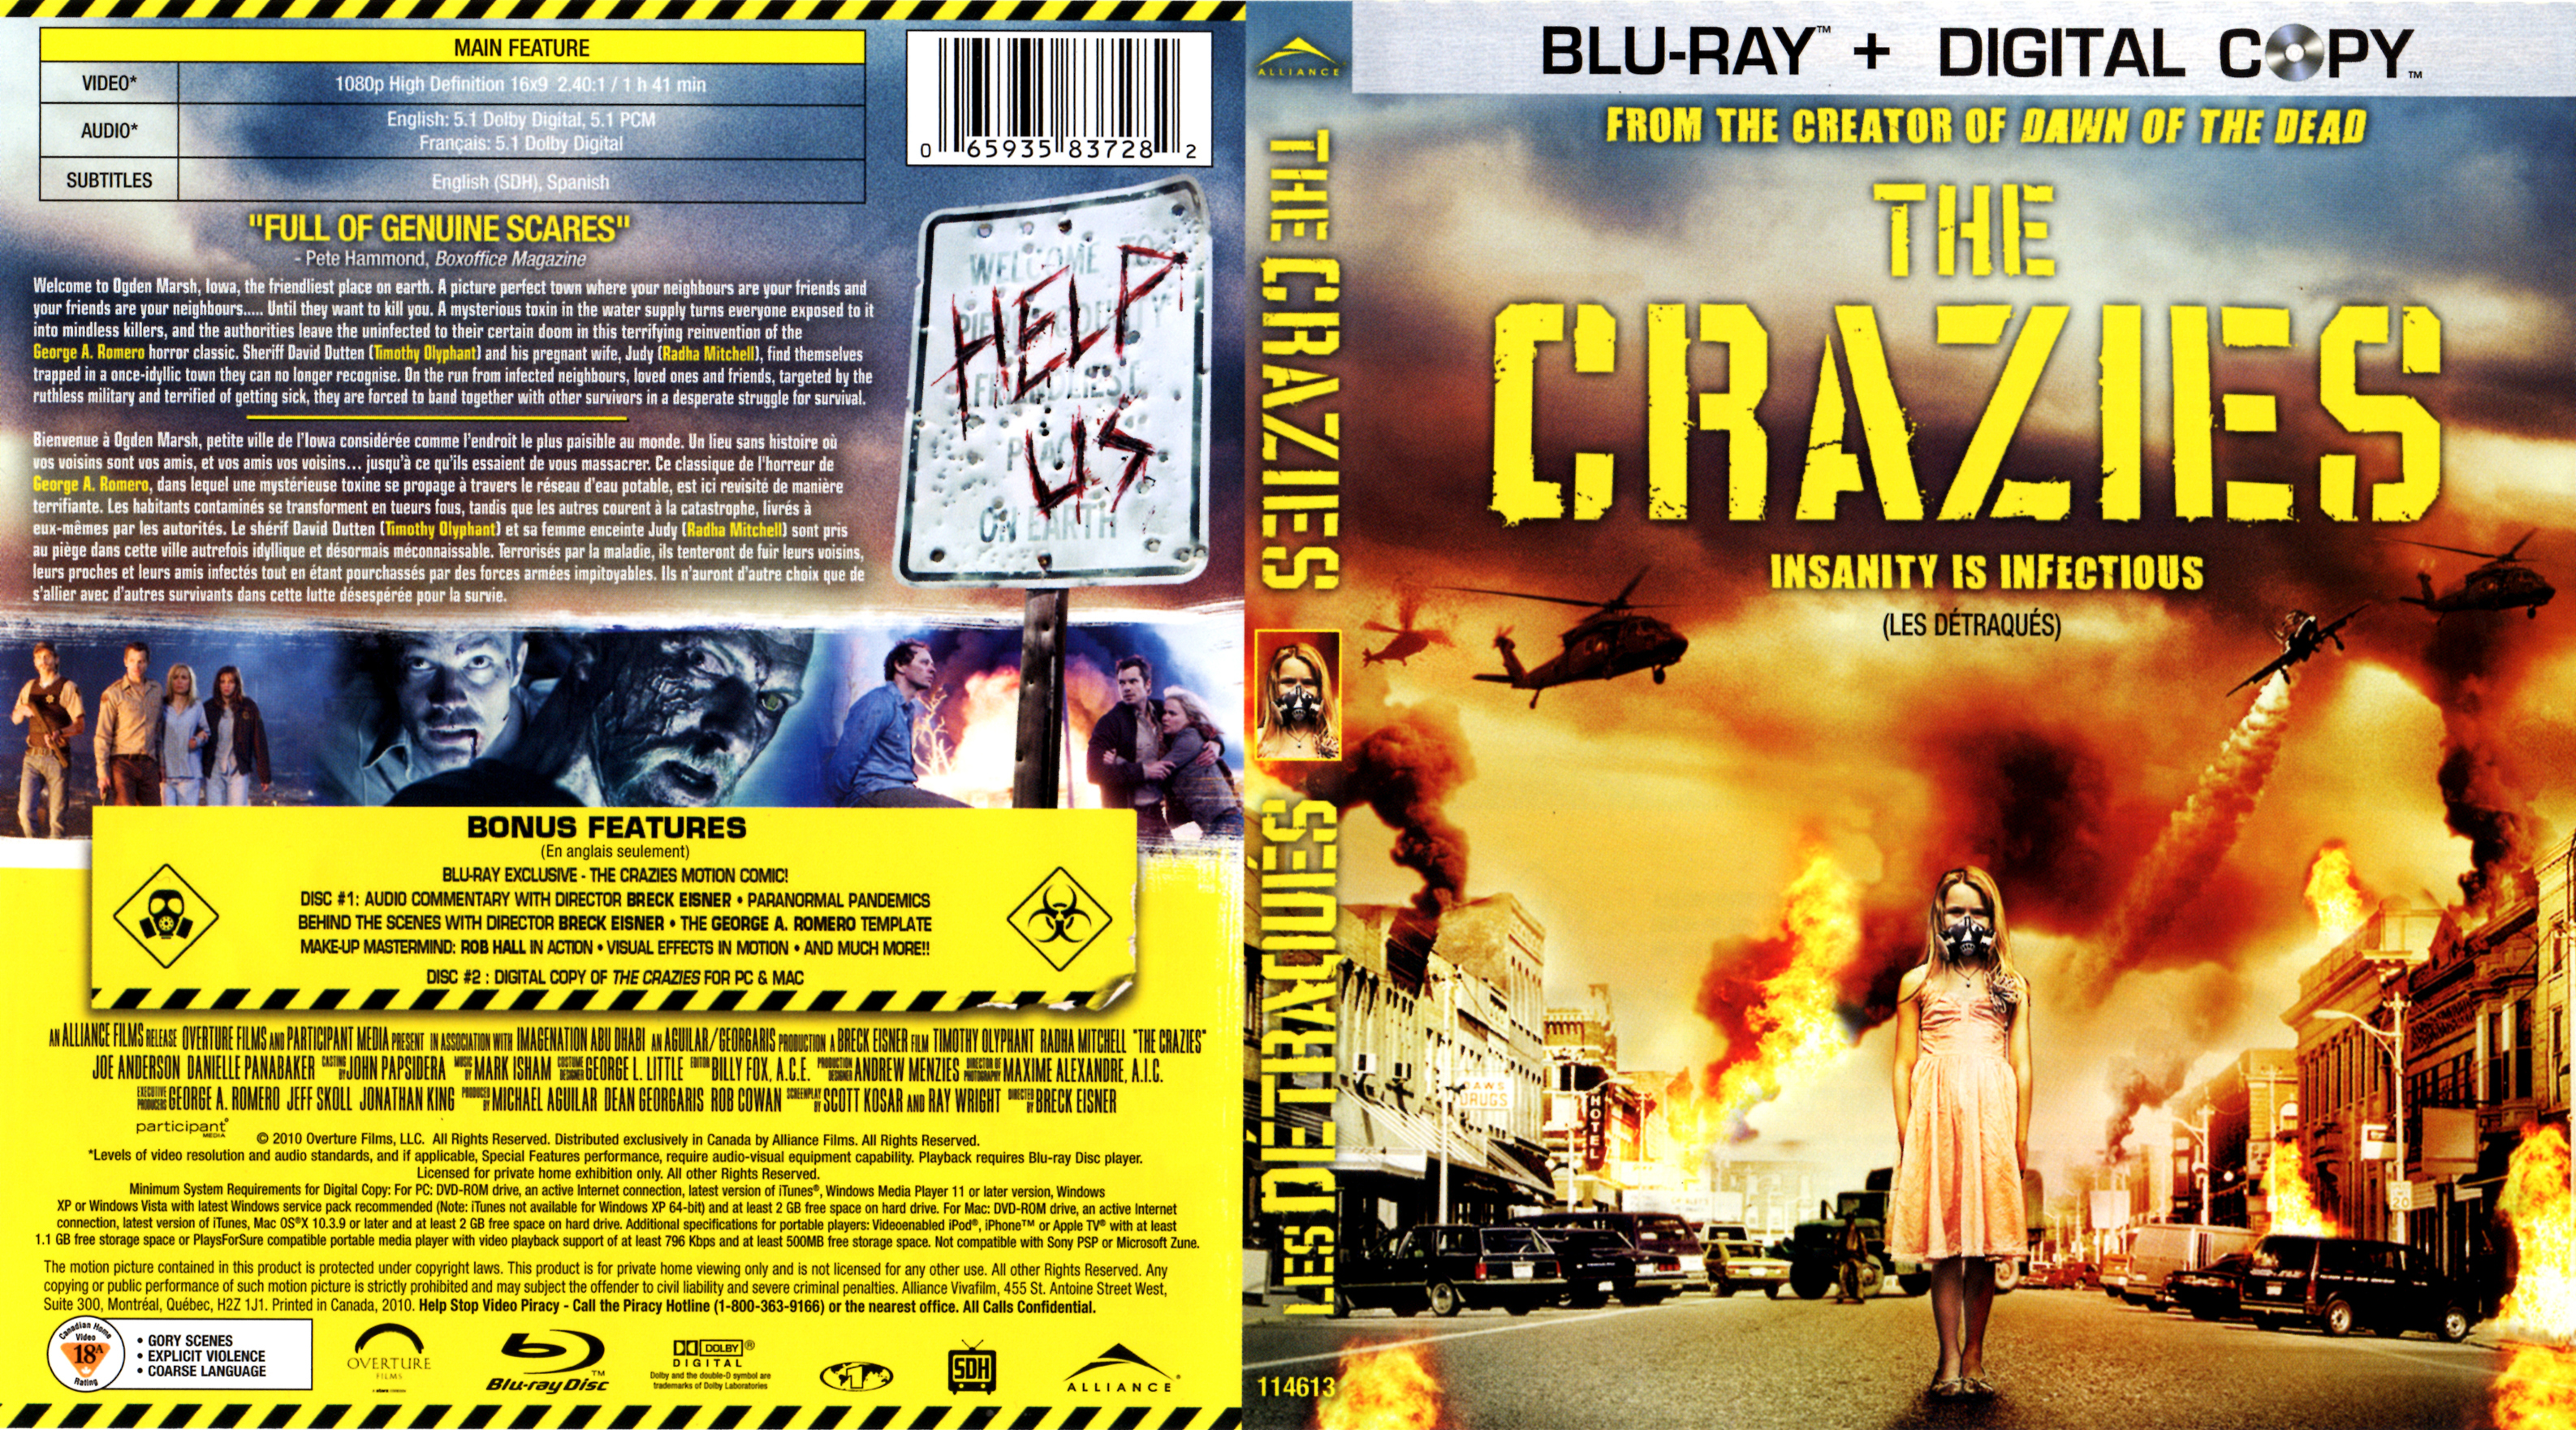 Jaquette DVD The crazies - Les dtraqus (2010) (Canadienne) (BLU-RAY)